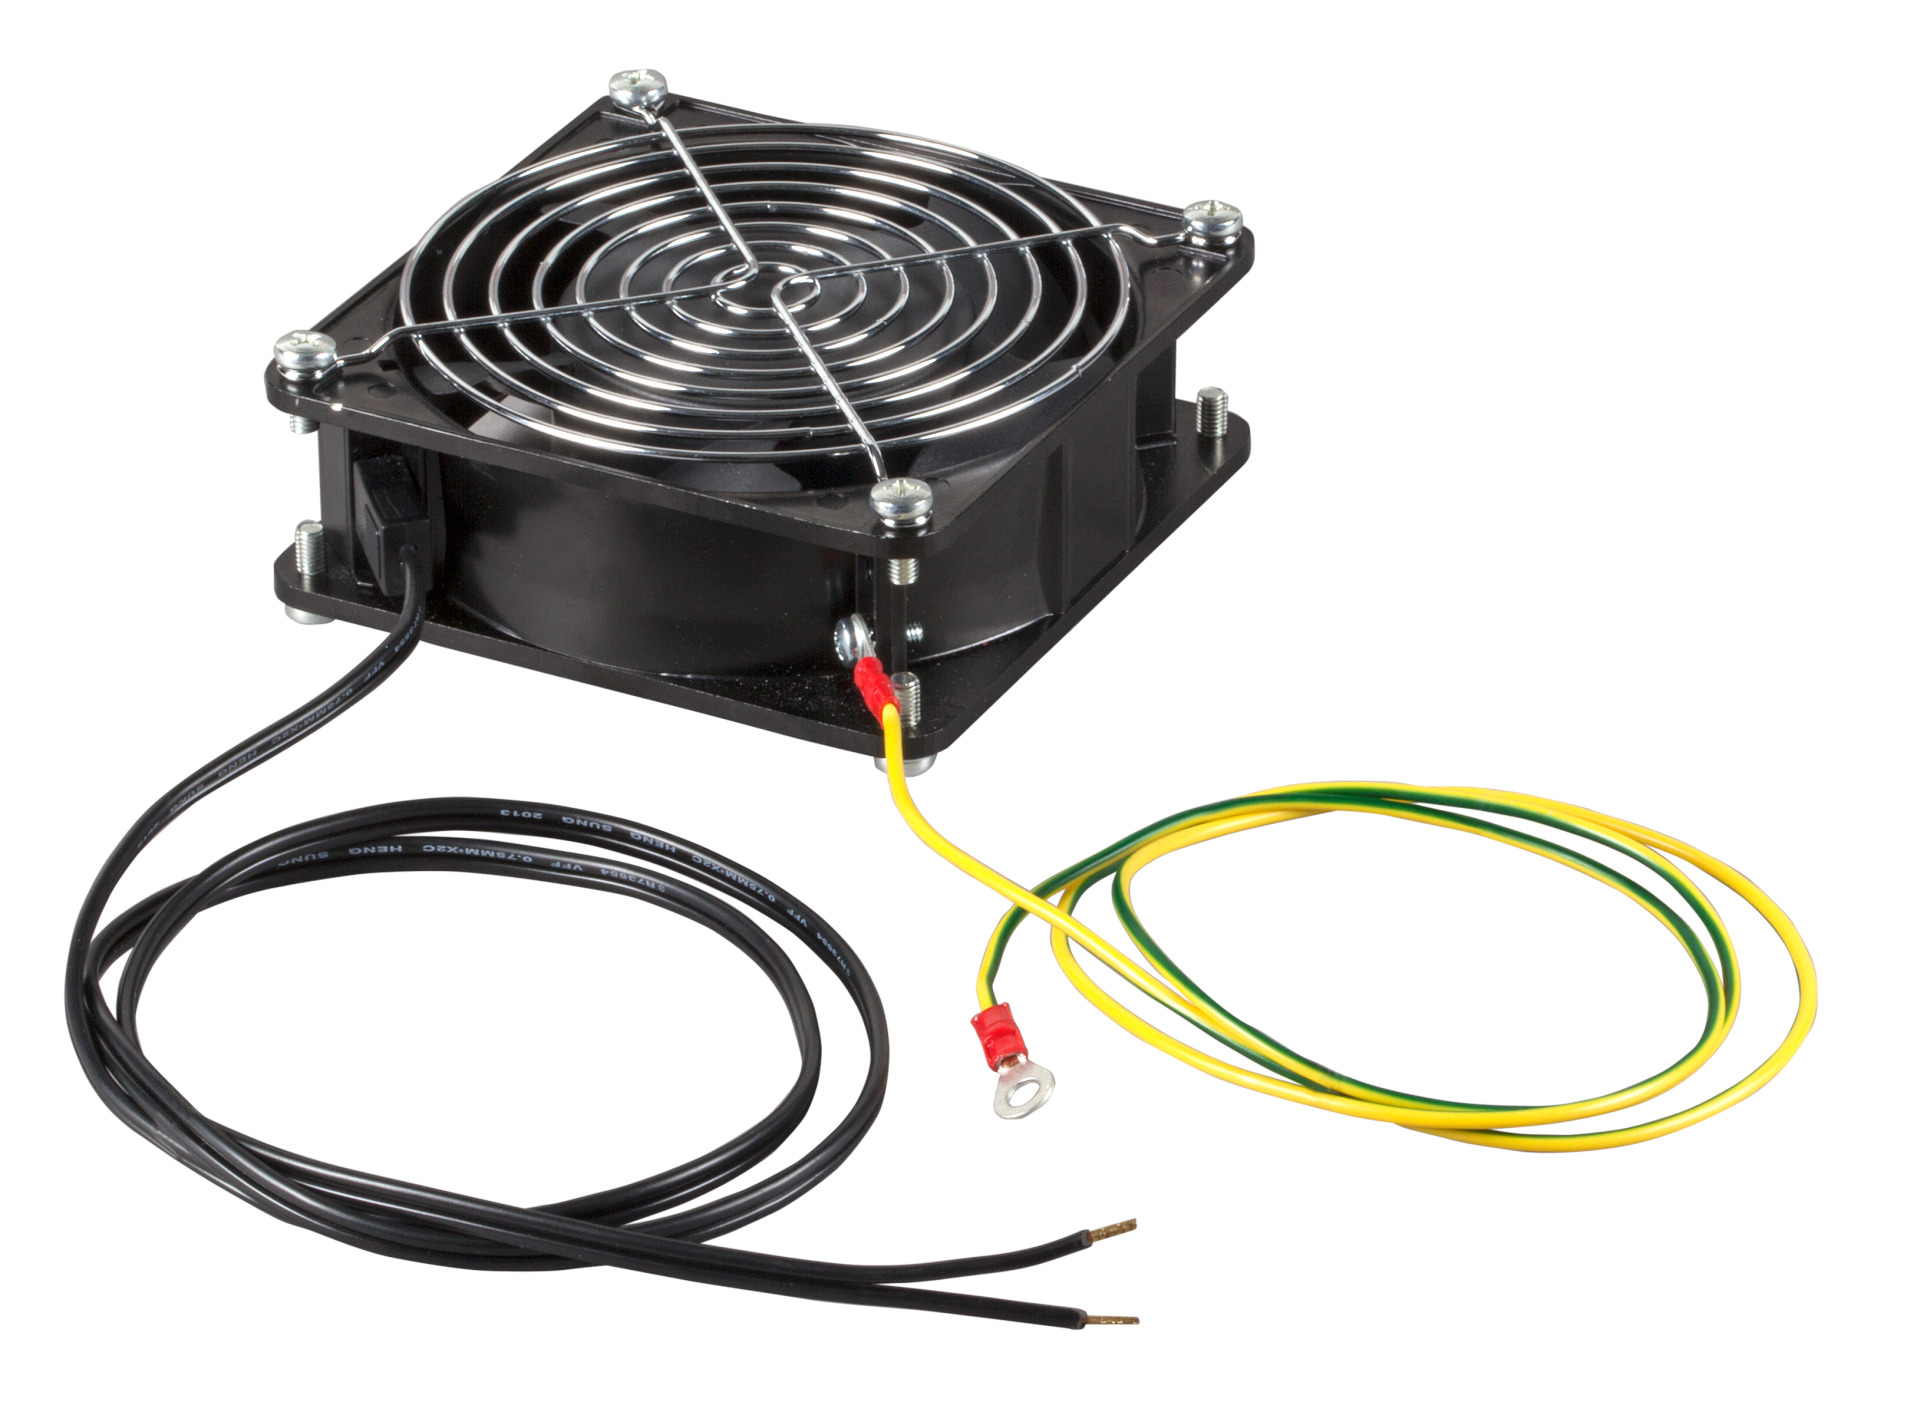 Fan for 19" Wall Mounting Cabinets, 120 mm, 230 V / 50 Hz